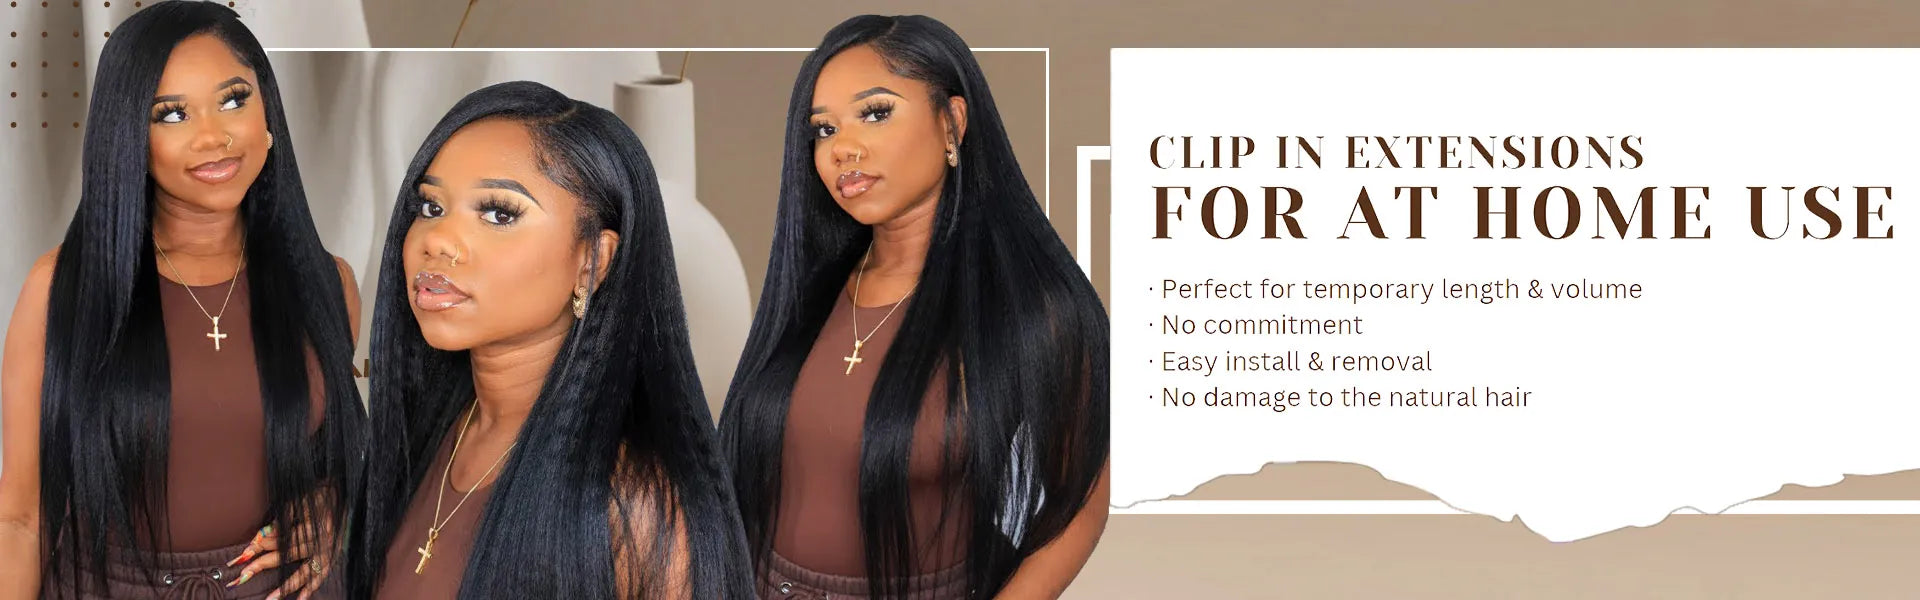 clip in extensions for at home use Ywigs